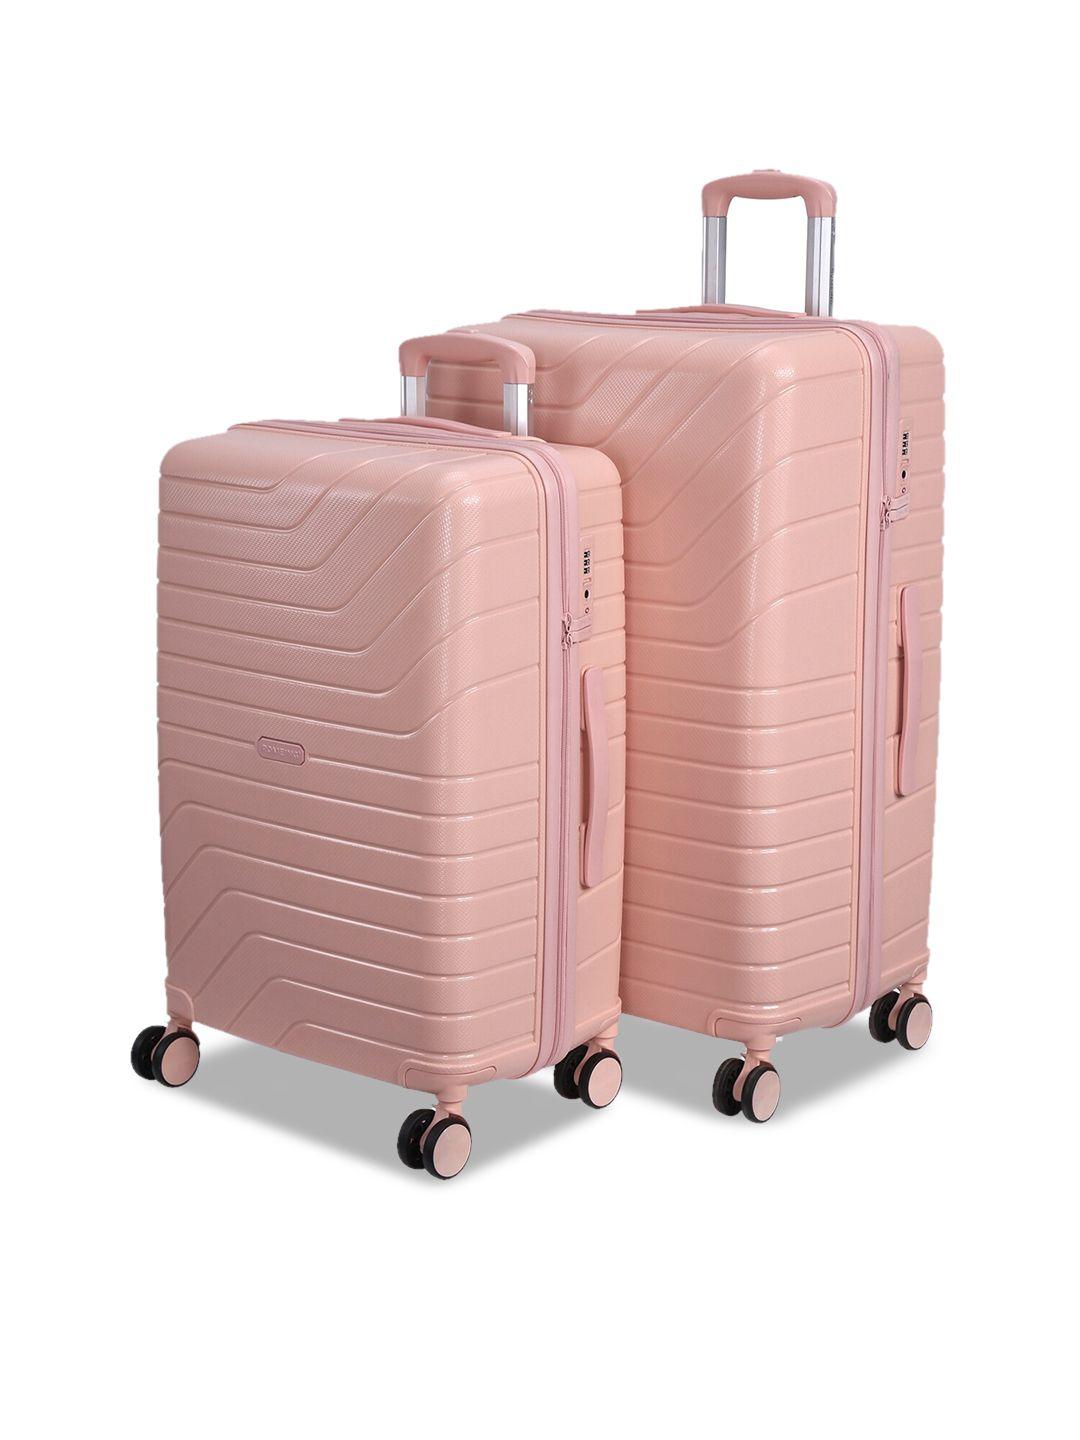 romeing tuscany set of 2 pink textured polypropylene trolley suitcases